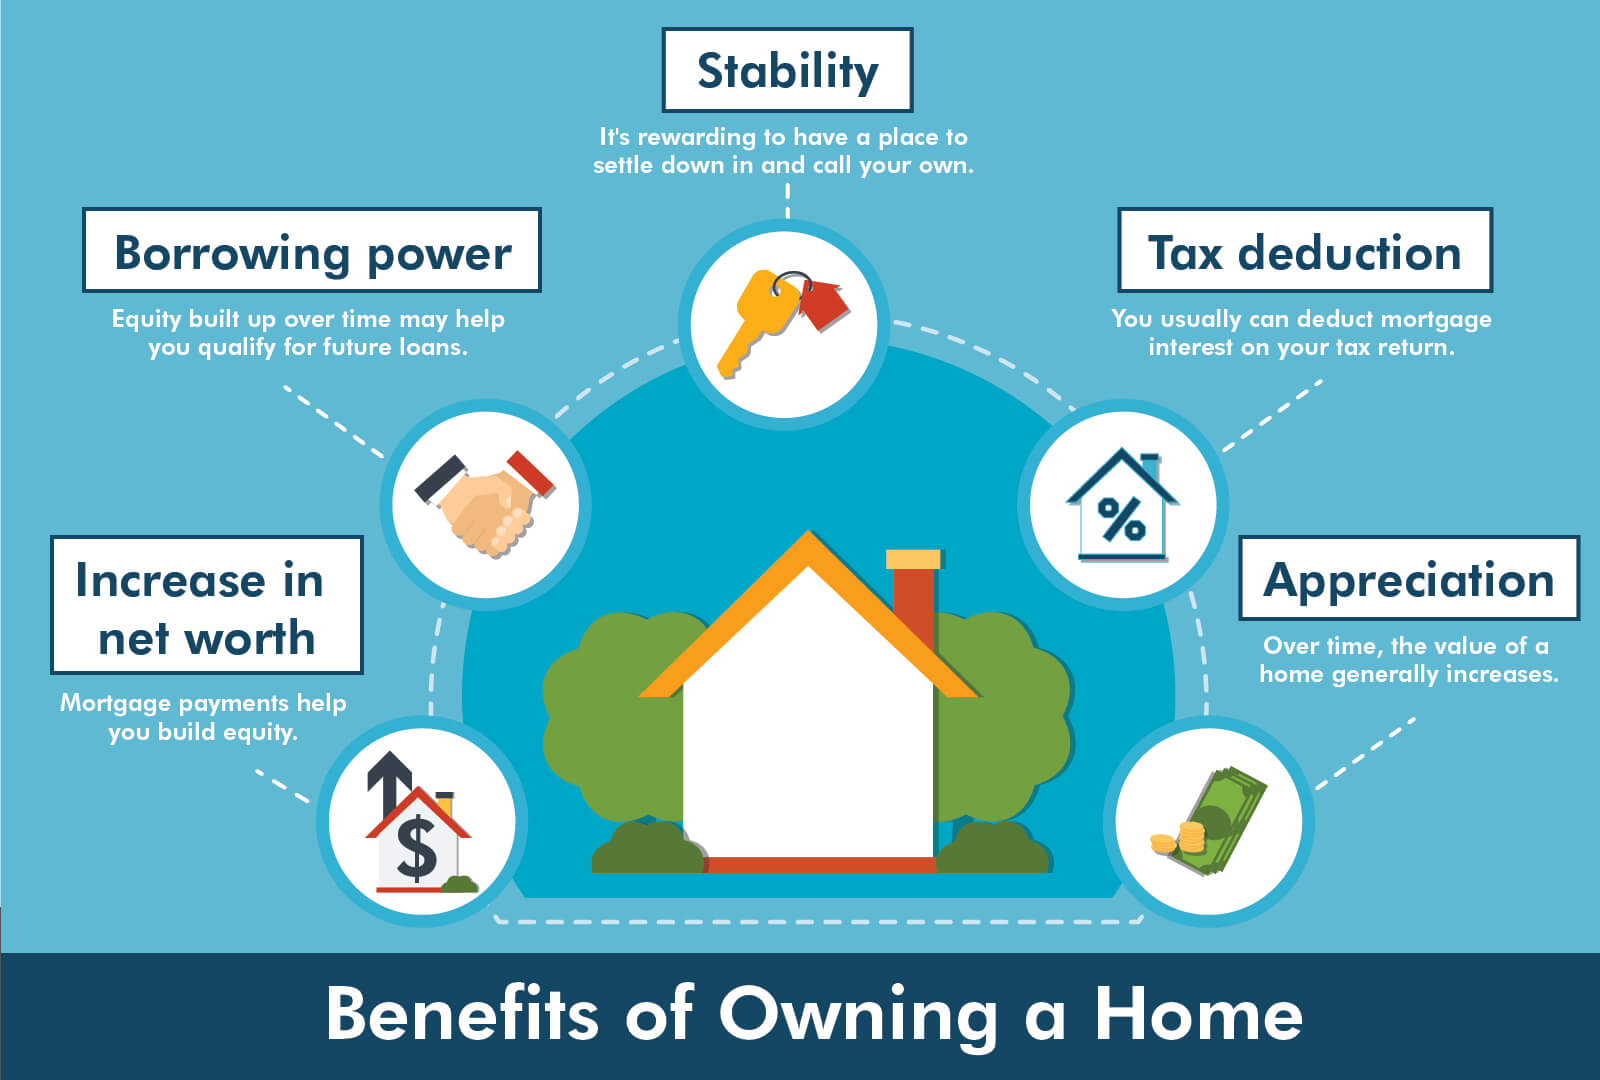 The Benefits of Owning a Home